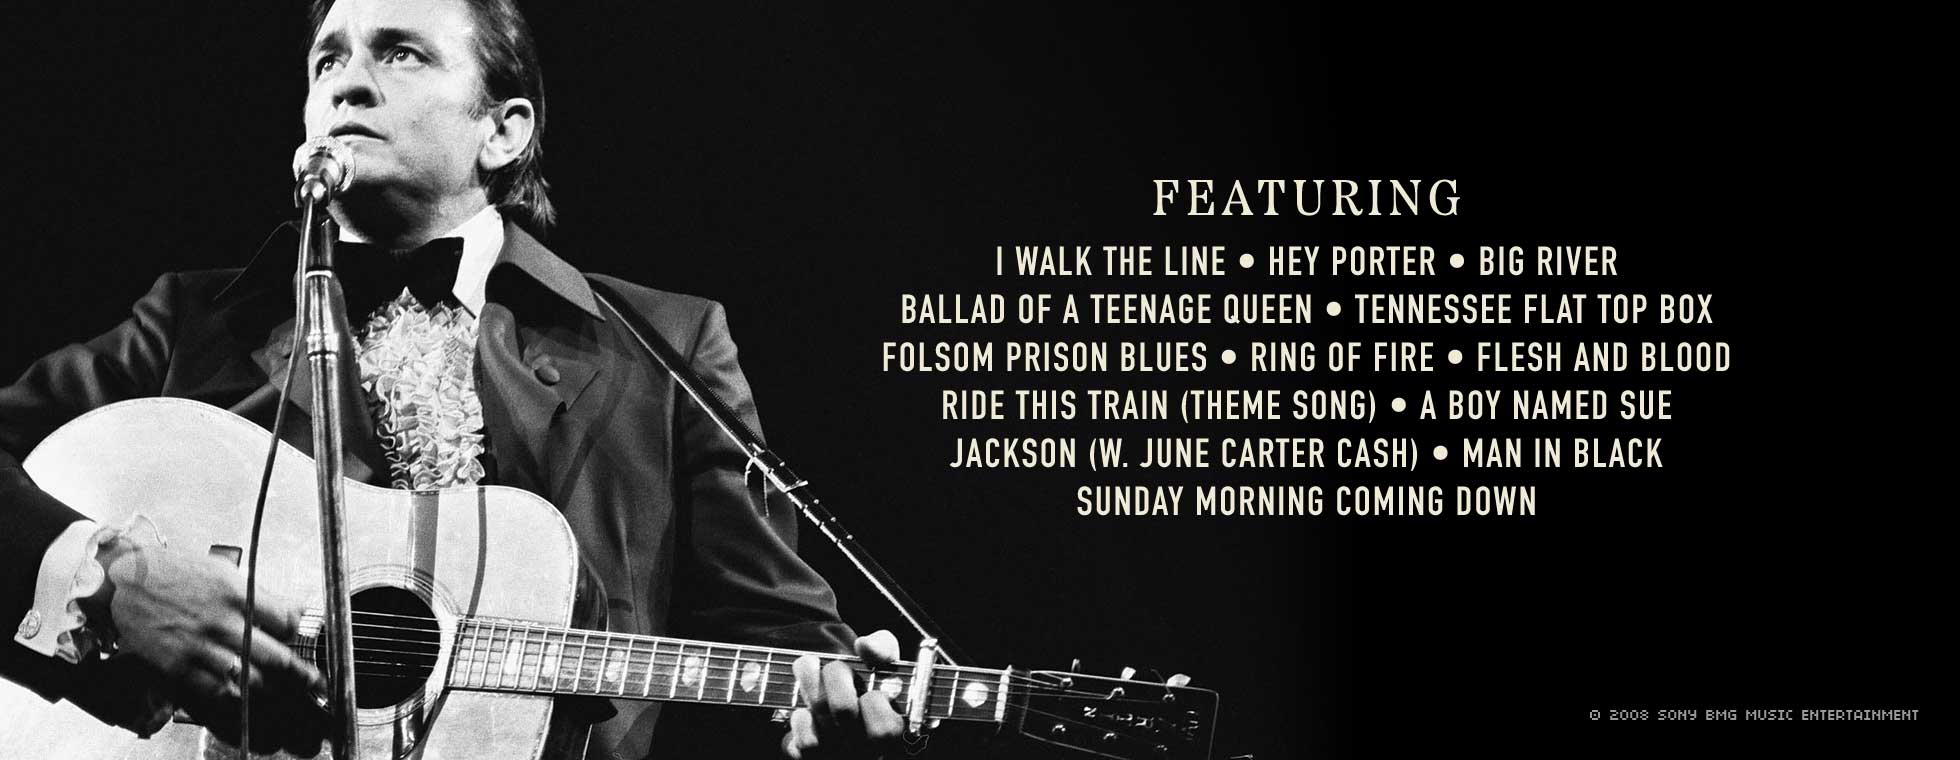 Next to a vintage photo of Johnny Cash standing in front of a microphone and playing a guitar is a list of song titles, including “I Walk the Line,” “Hey Porter,” and “Big River.”